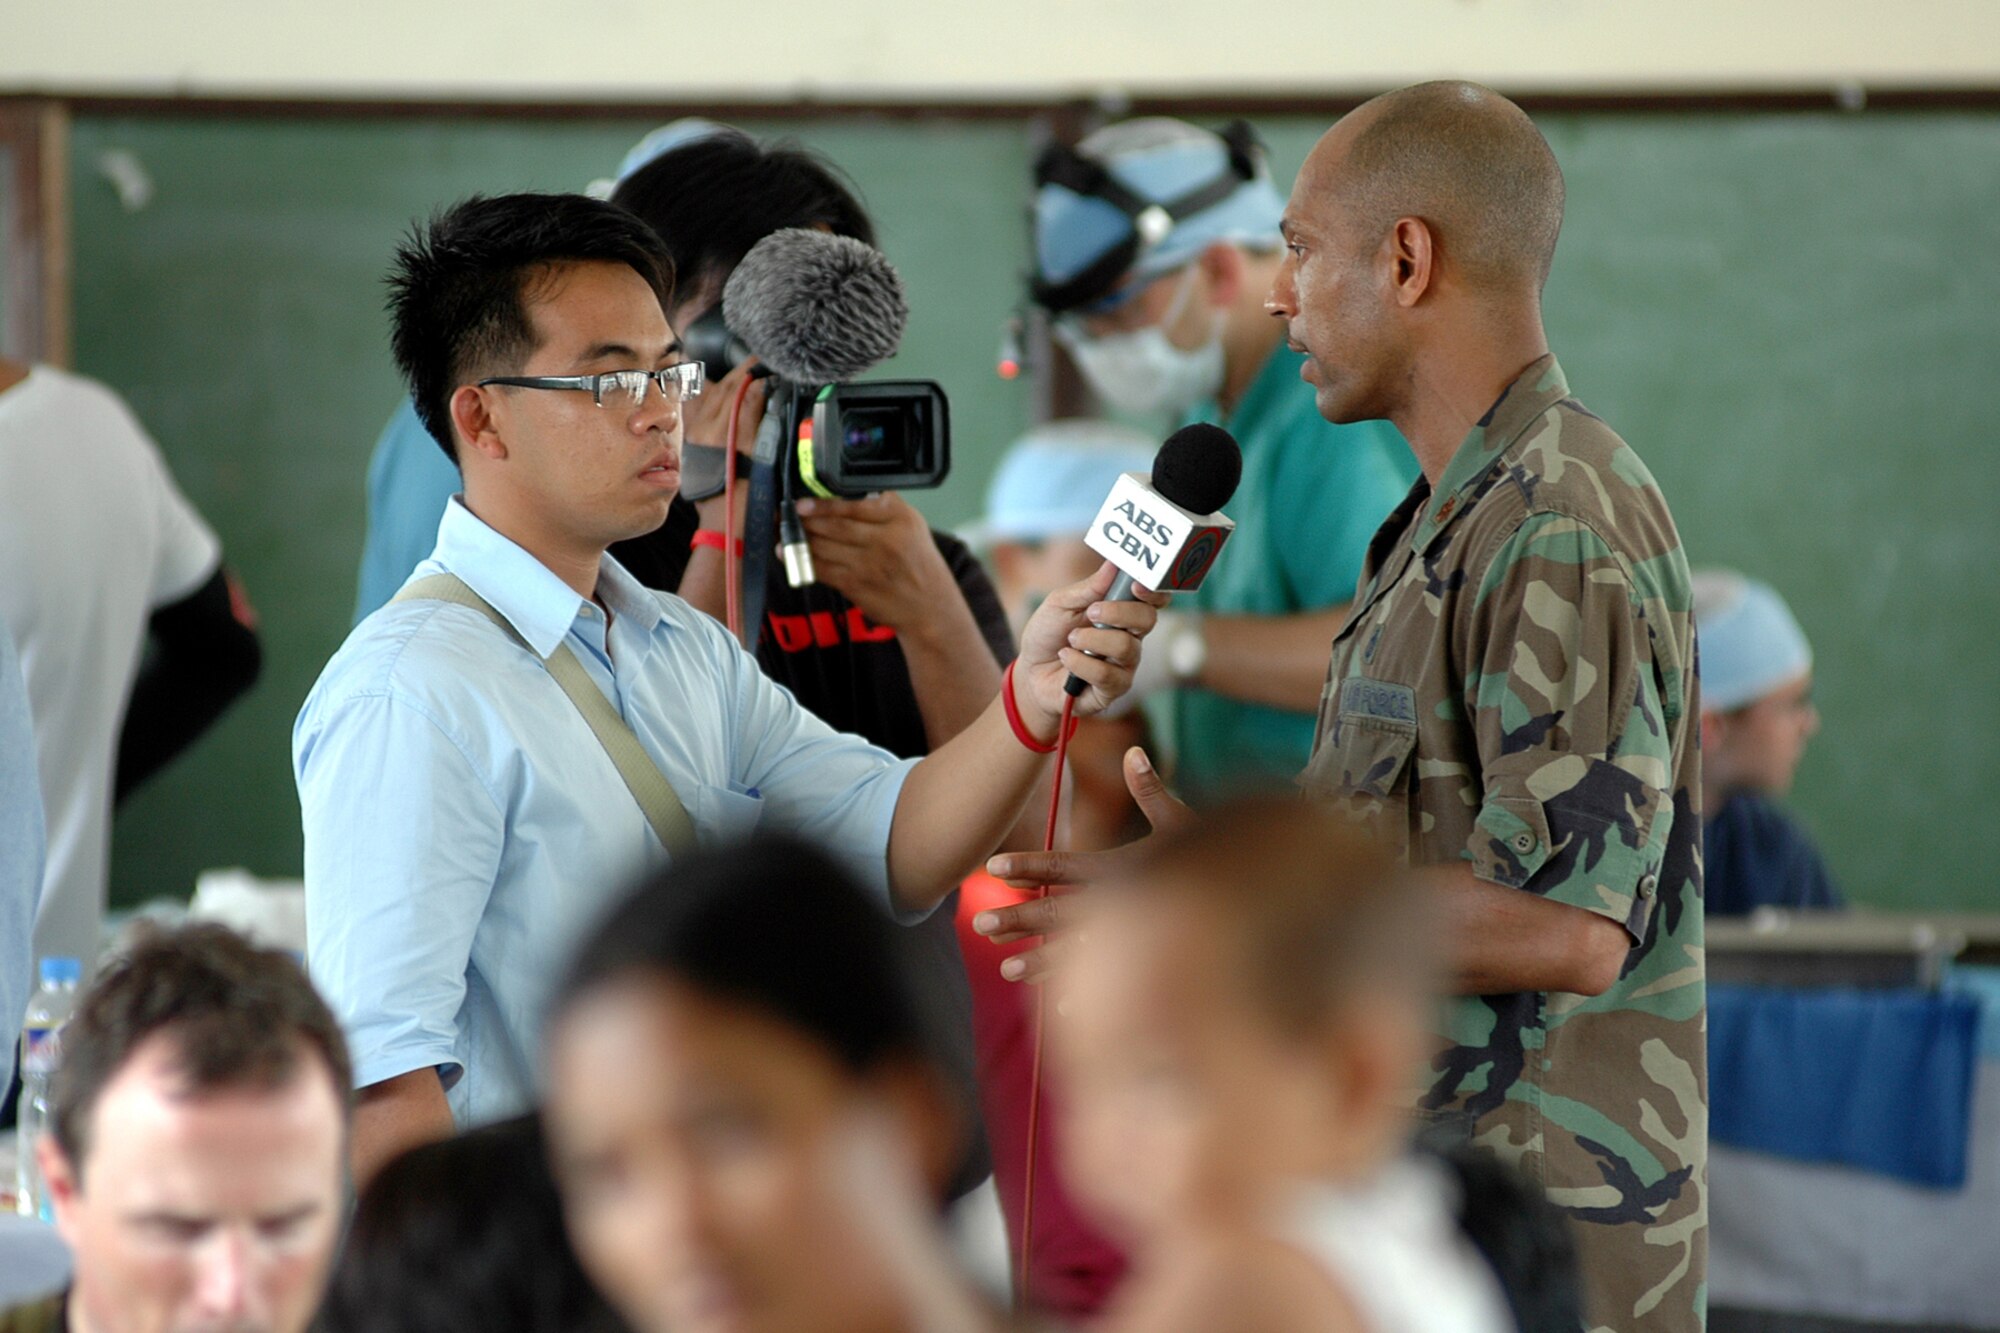 LEGASPI, Philippines (July 6, 2007)– U.S. Air Force Maj. Bernard Van Pelt is interviewed by a local Philippine television station about the medical and dental work for the local residents at Gogon Elementary School. Van Pelt led a medical group who provided medical services at the school in support of Pacific Partnership. The four-month Pacific Partnership humanitarian-assistance mission brings to the region general and ophthalmology surgery, basic medical evaluation and treatment, preventive medicine treatment, dental screenings and treatment, optometry screenings, eyewear distribution, public health training and veterinary services as requested by the Philippine government. U.S. Navy photo by Mass Communication Specialist 2nd Class (SW/AW) Kerryl Cacho 